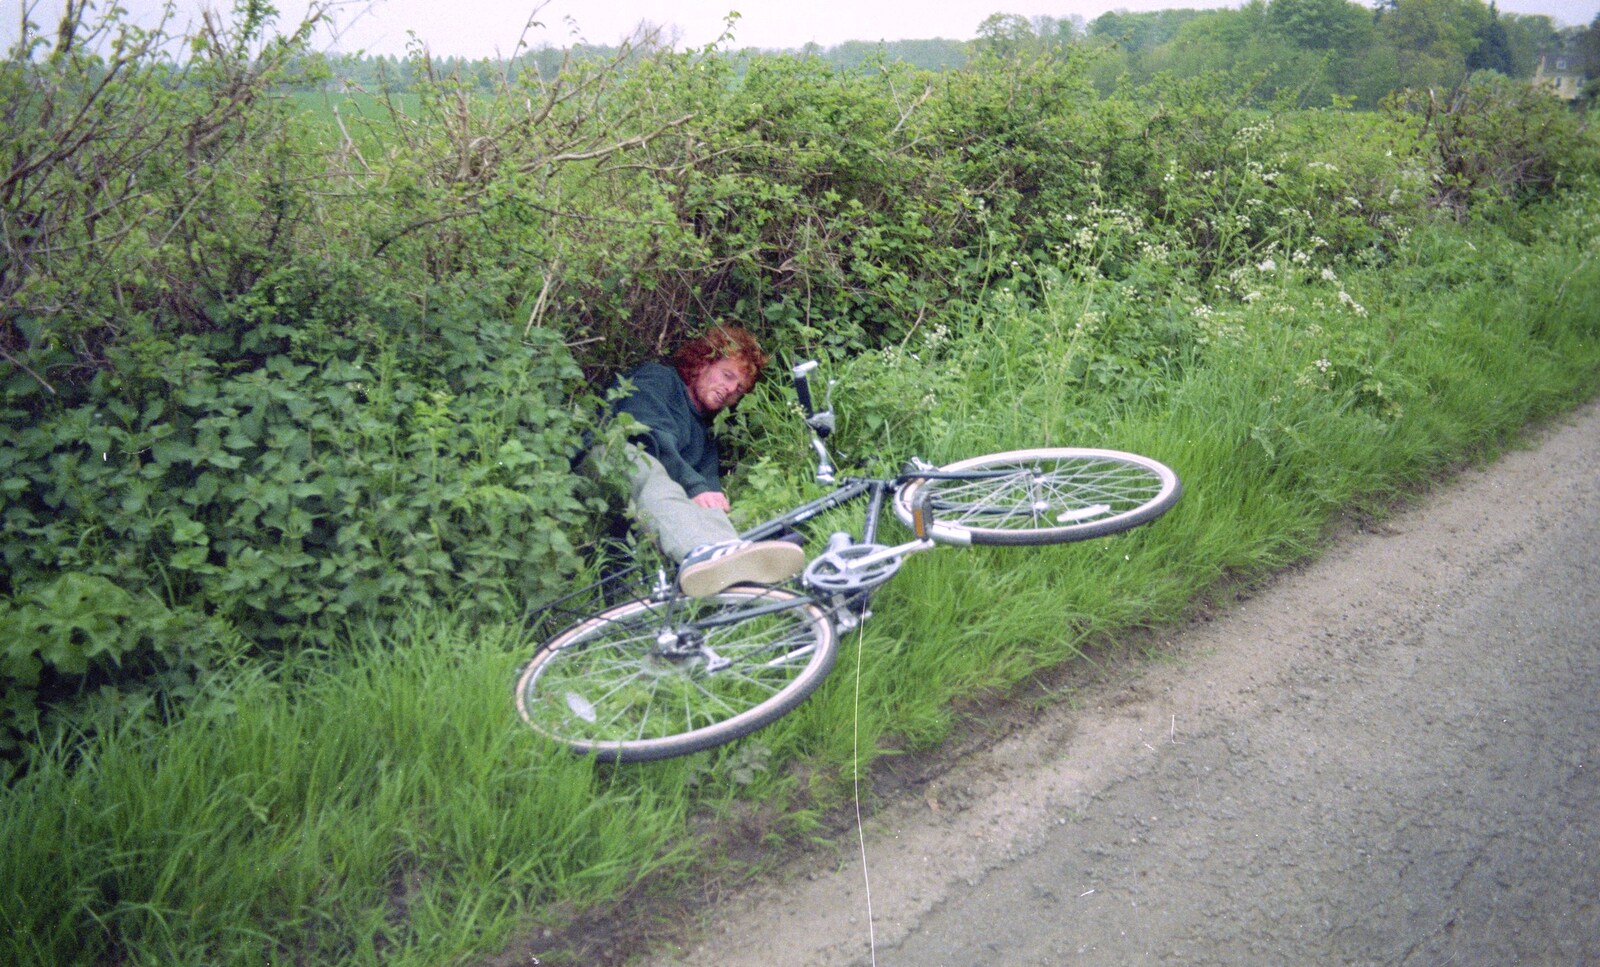 Wavy falls asleep on his bike and ends up in a hedge from A BSCC Bike Ride, Brockdish Greyhound and Hoxne Swan, Suffolk - 4th May 2000